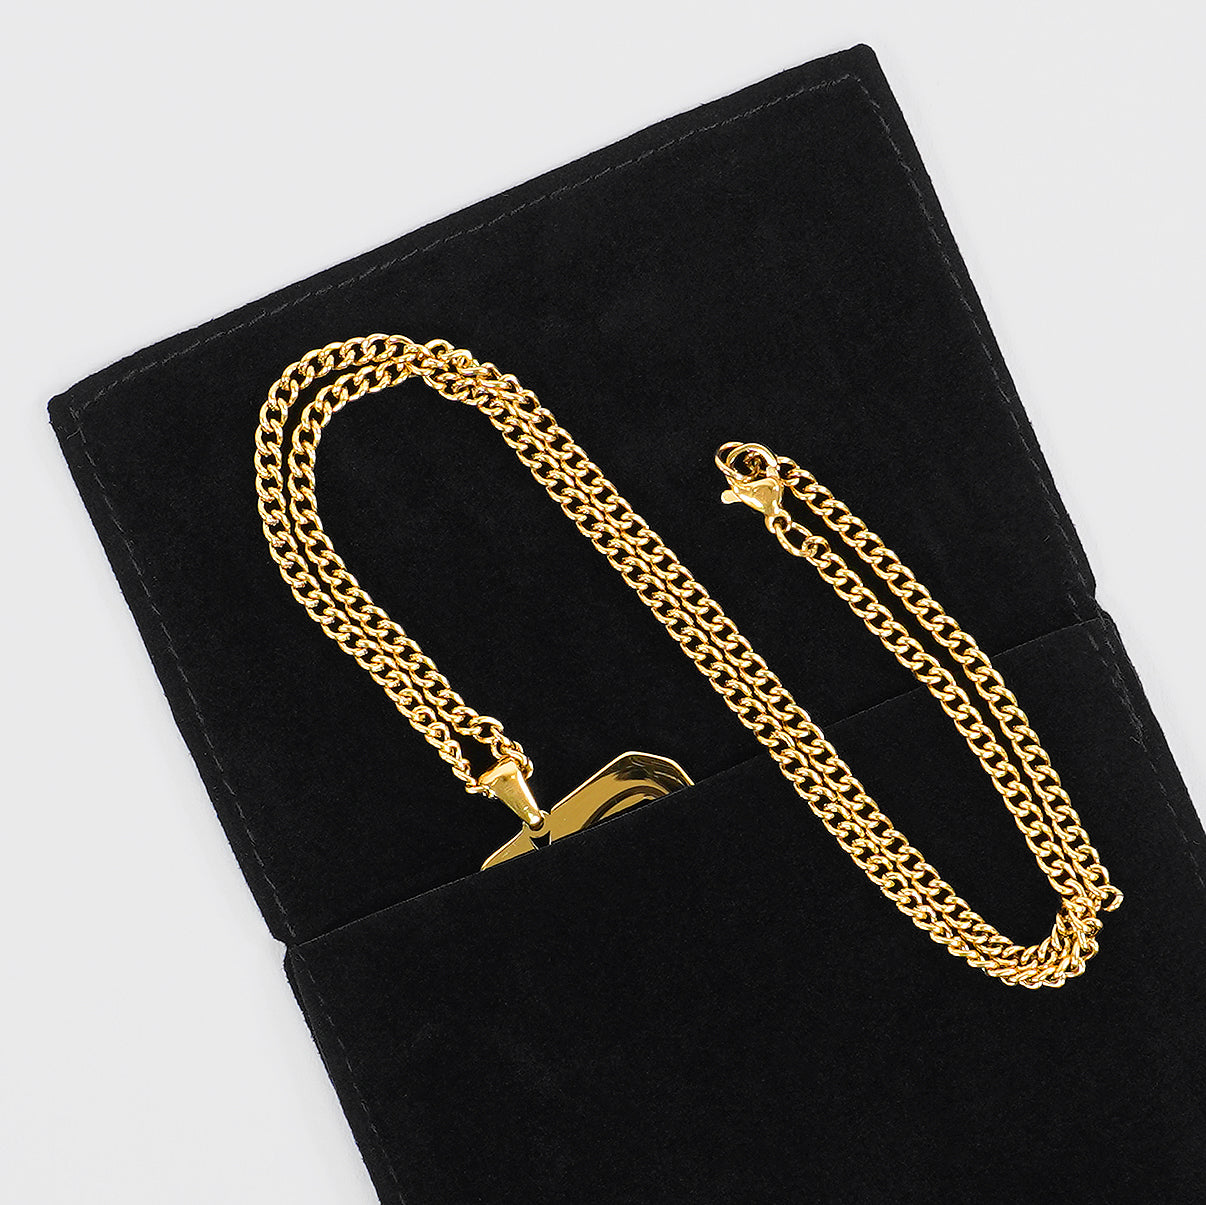 67 Number Pendant with Chain Necklace - Gold Plated Stainless Steel